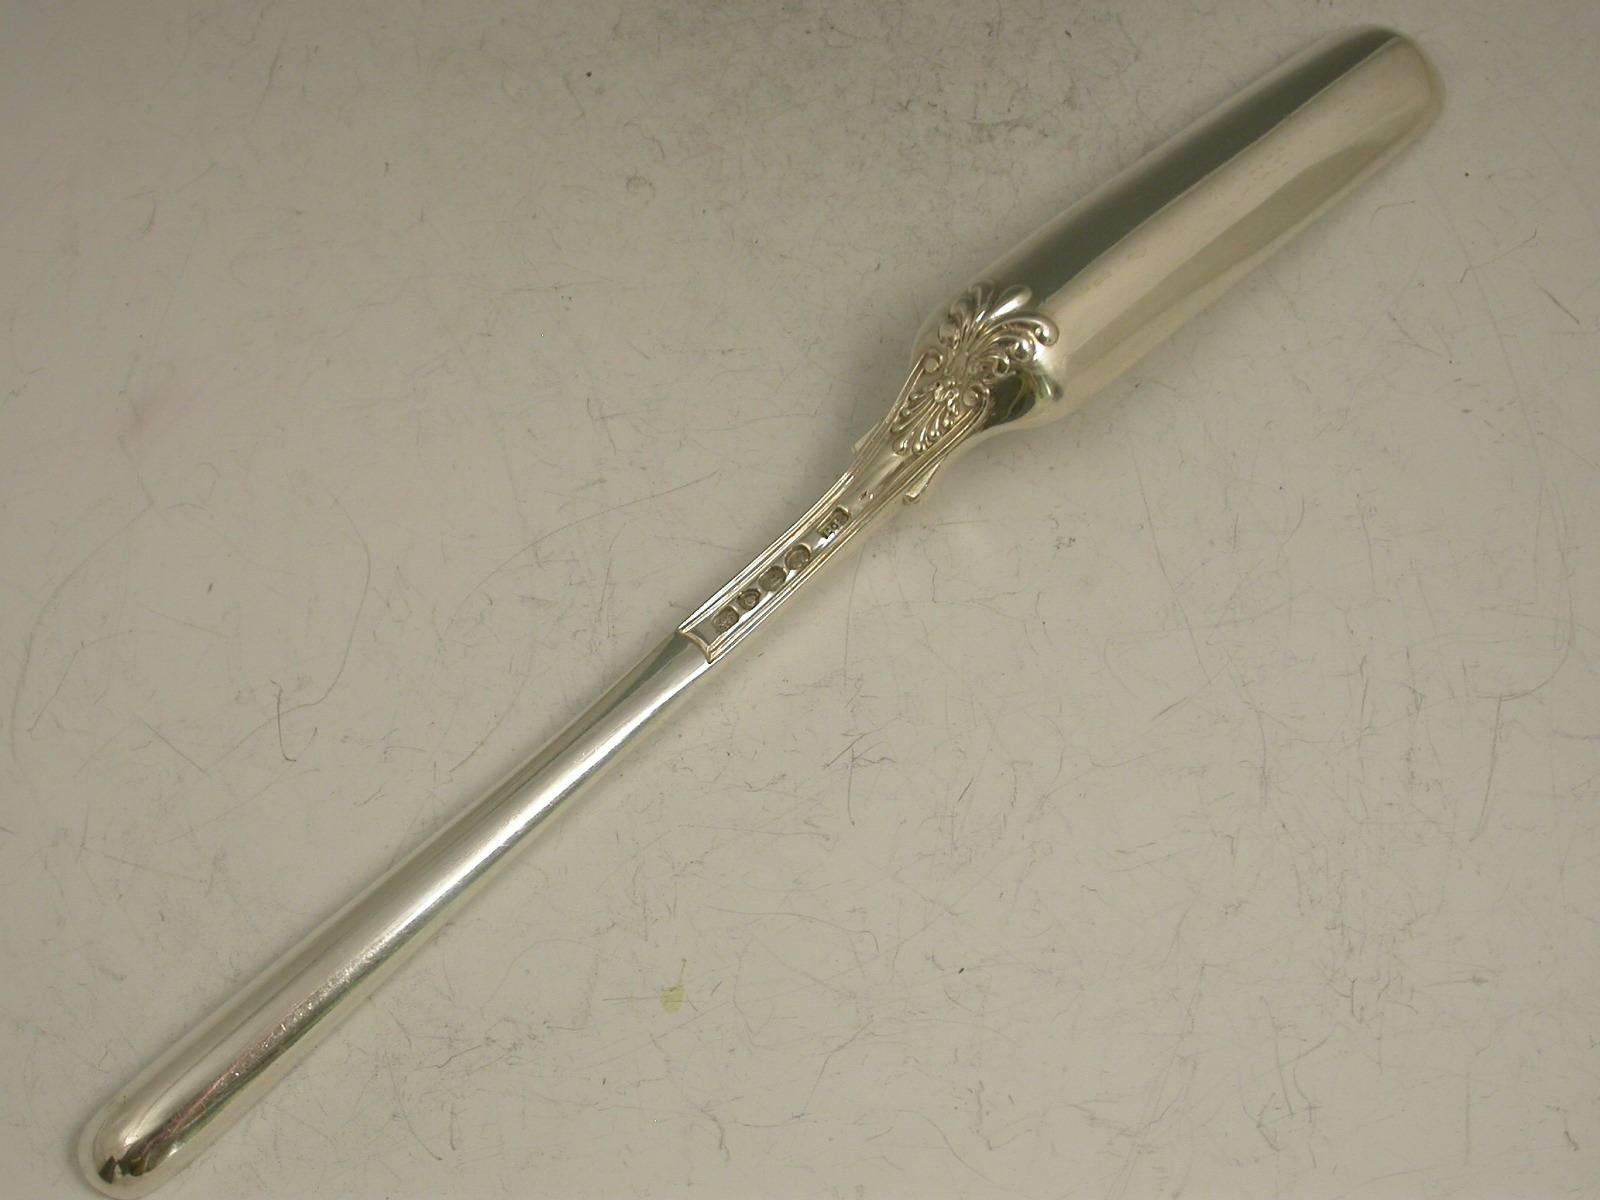 A fine and rare George IV large and heavy cast silver Marrow Scoop in Queens Rosette pattern, with two tapering bowls.

By Richard Pouldon, London, 1825.

In good condition with no damage or repair

Measures: Length 235 mm (9.25